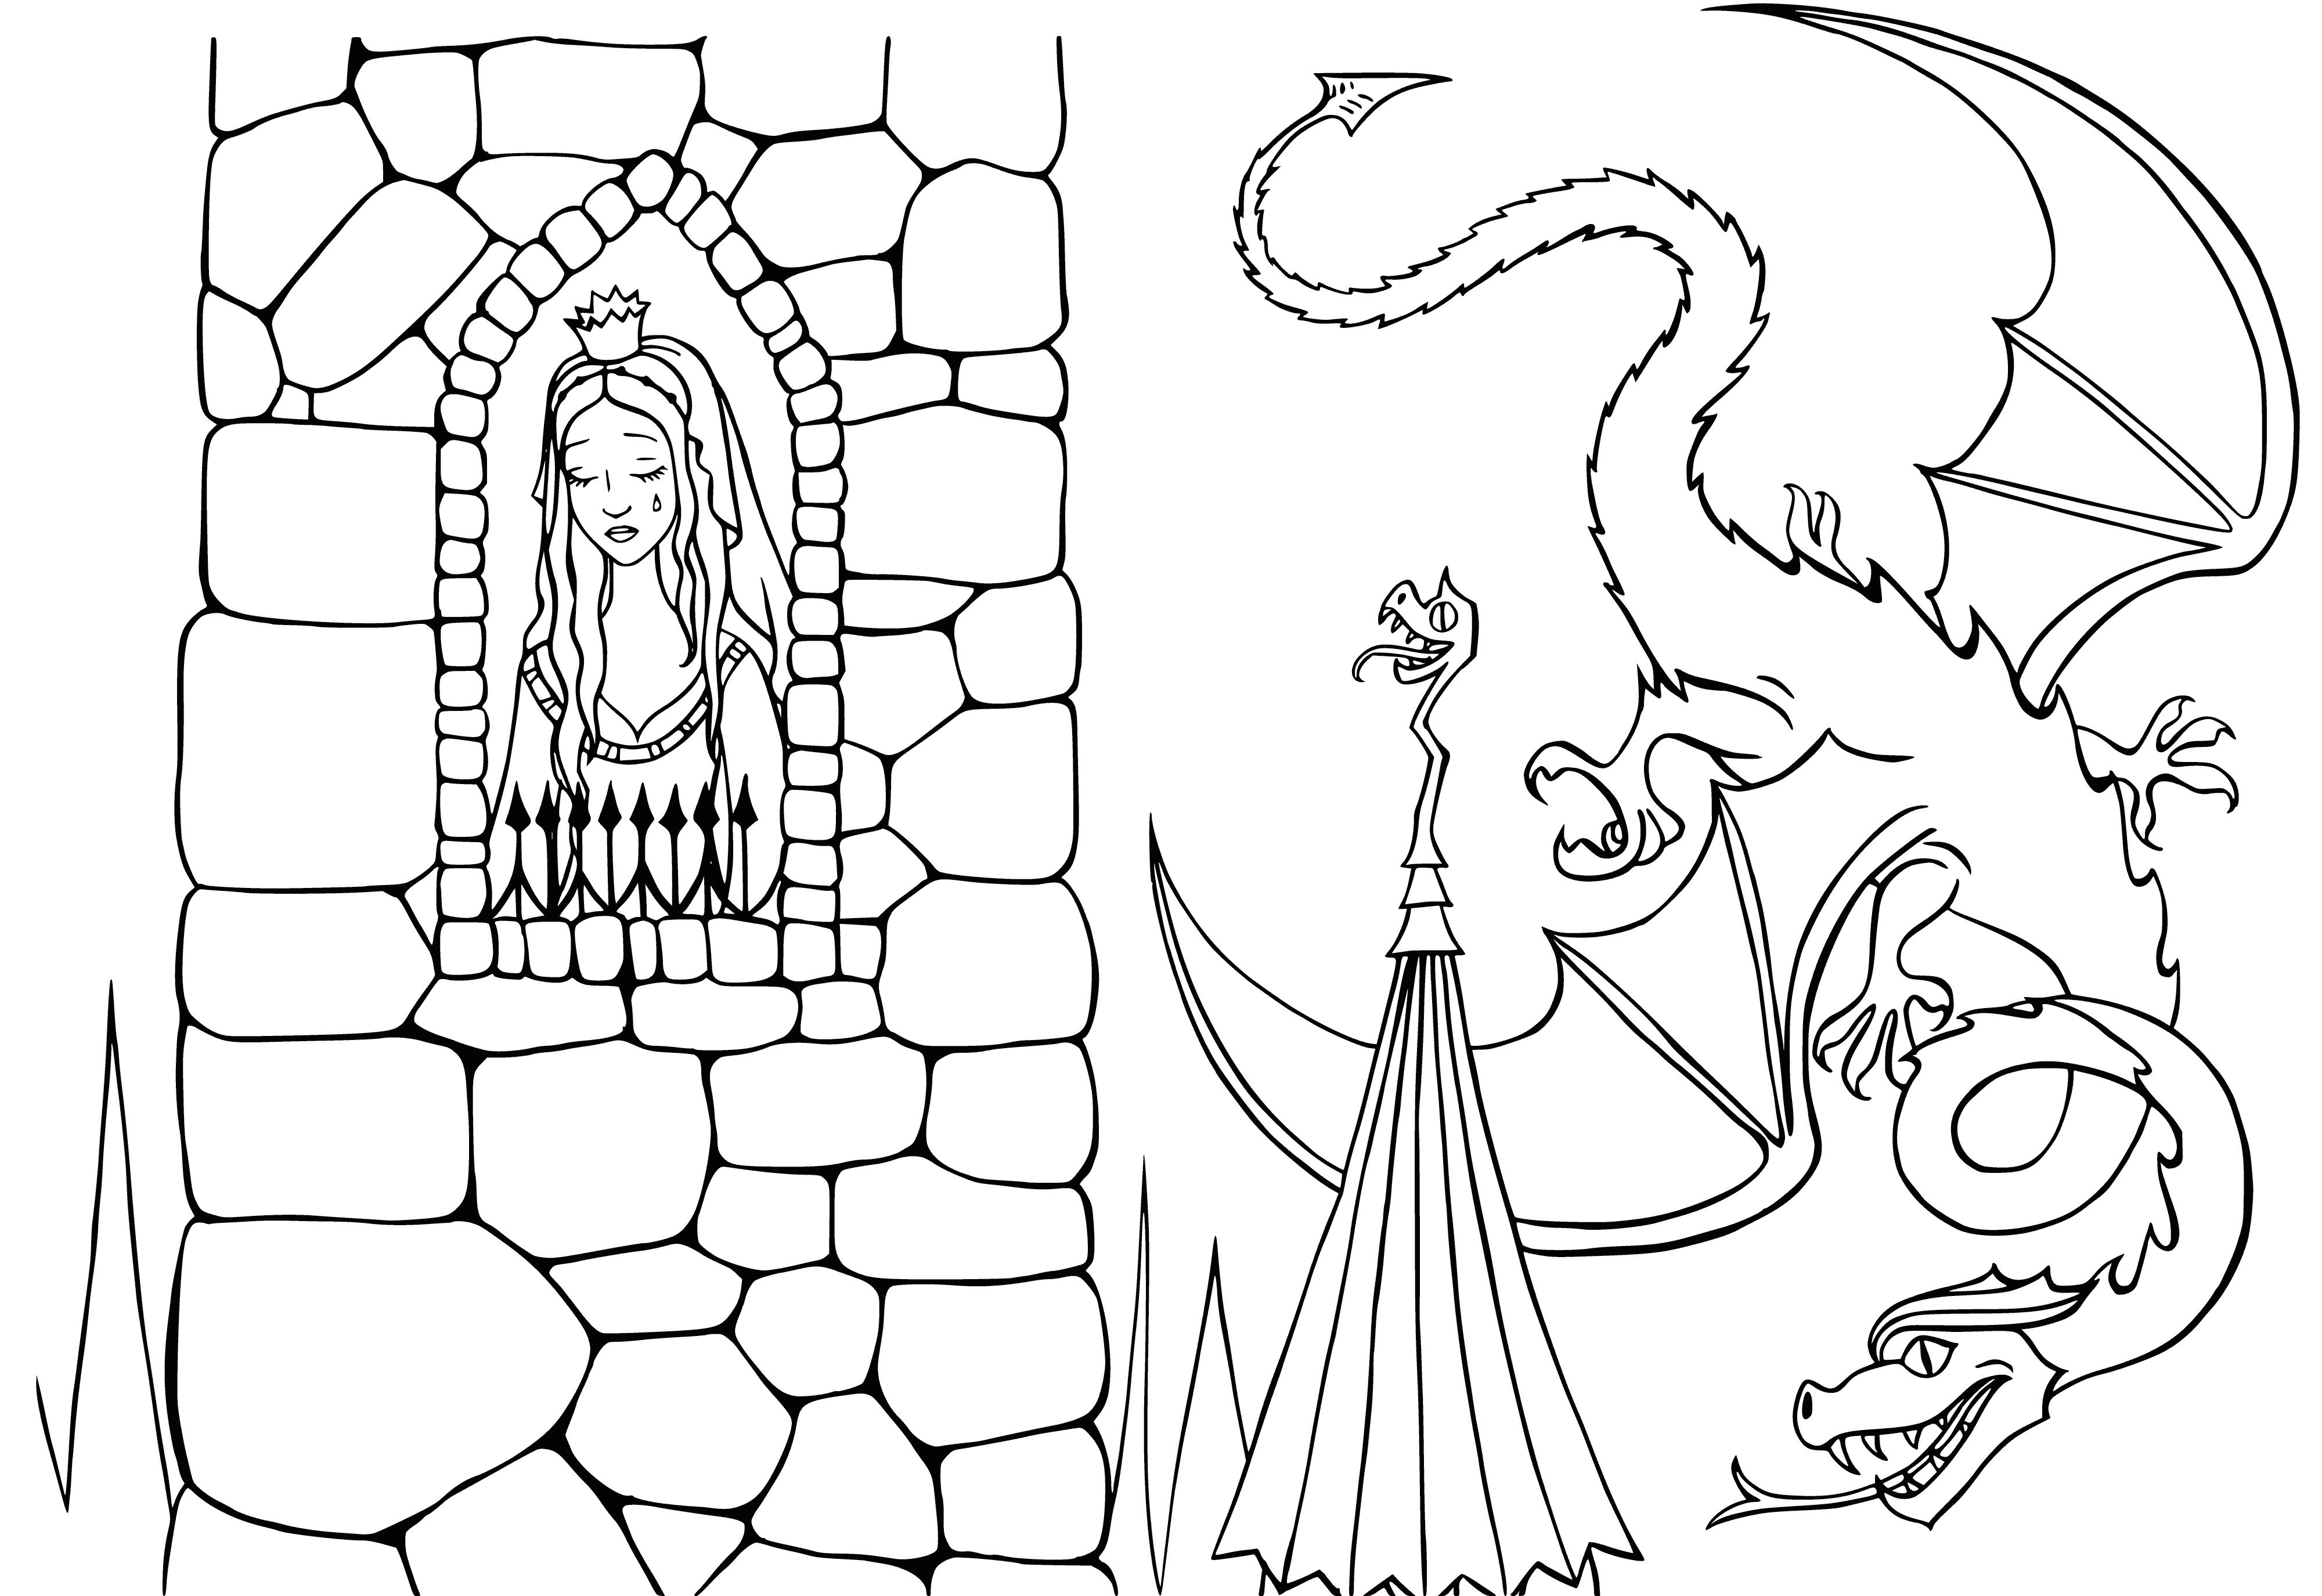 coloring page: Fairy Kingdom is a magical but dangerous place; fairies try to escape captors but never succeed, living in fear and darkness.